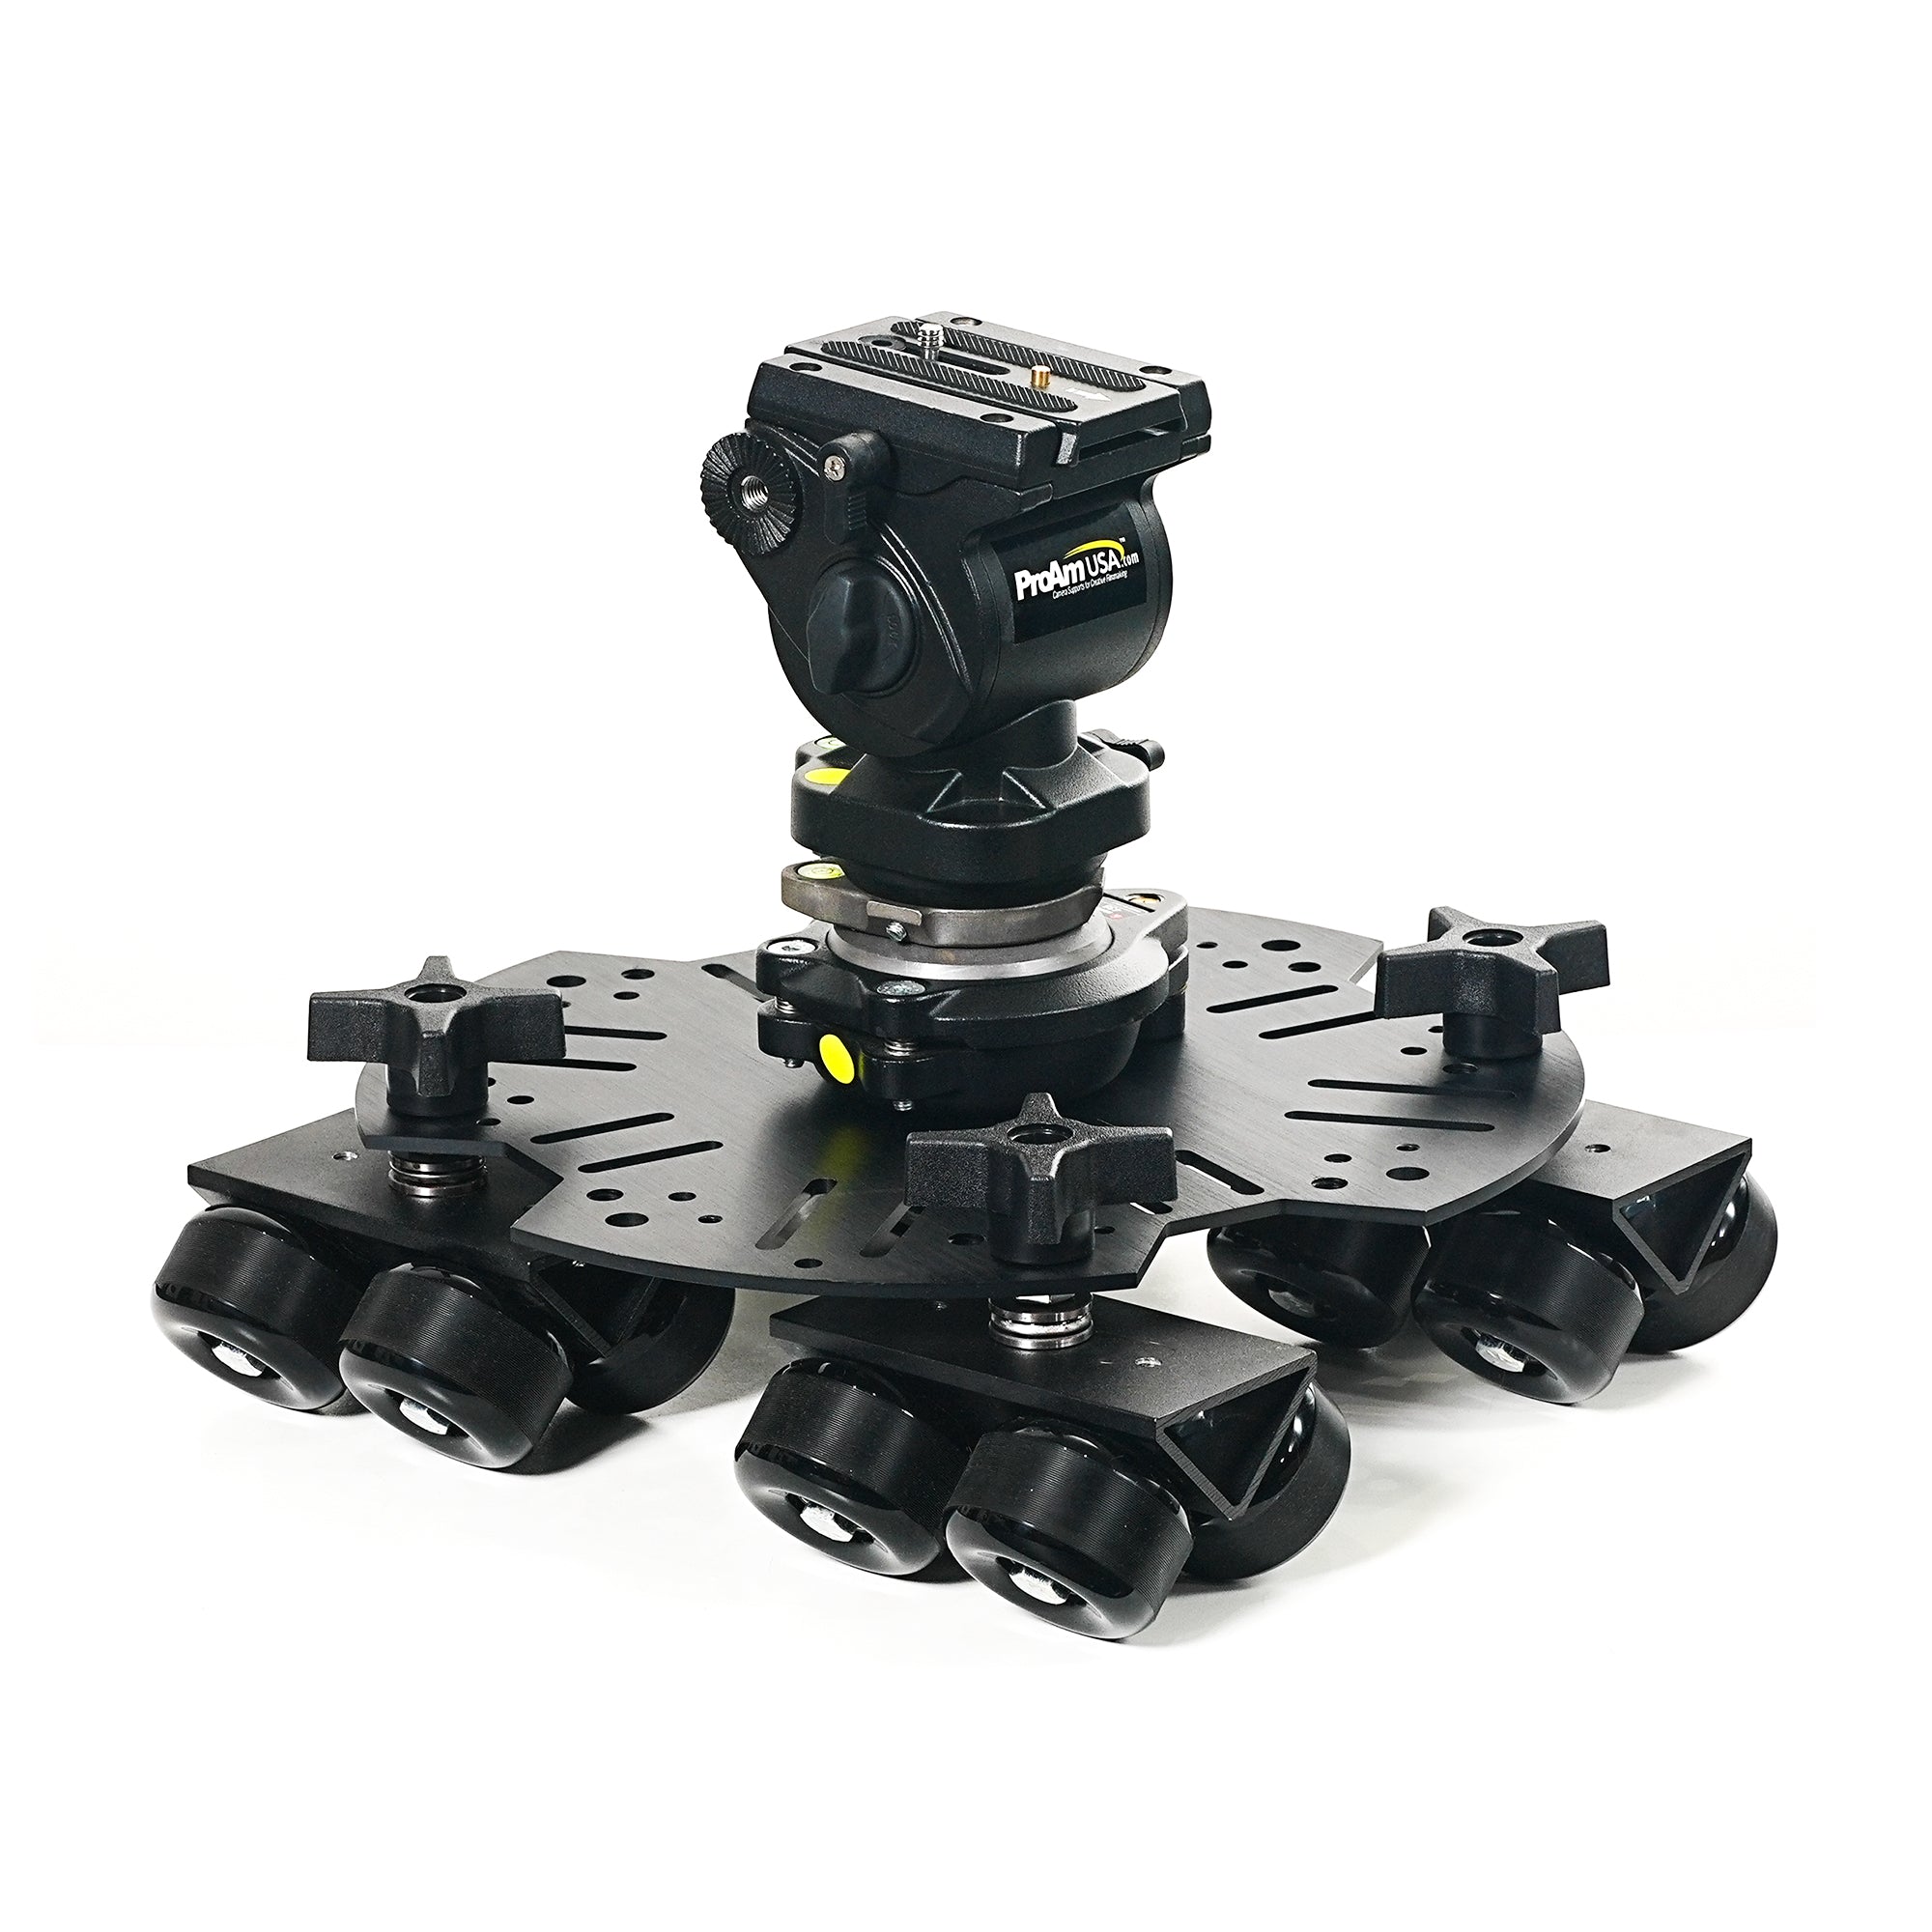 Modus Track Dolly System - Platform with 4 Bearing Wheel Sets